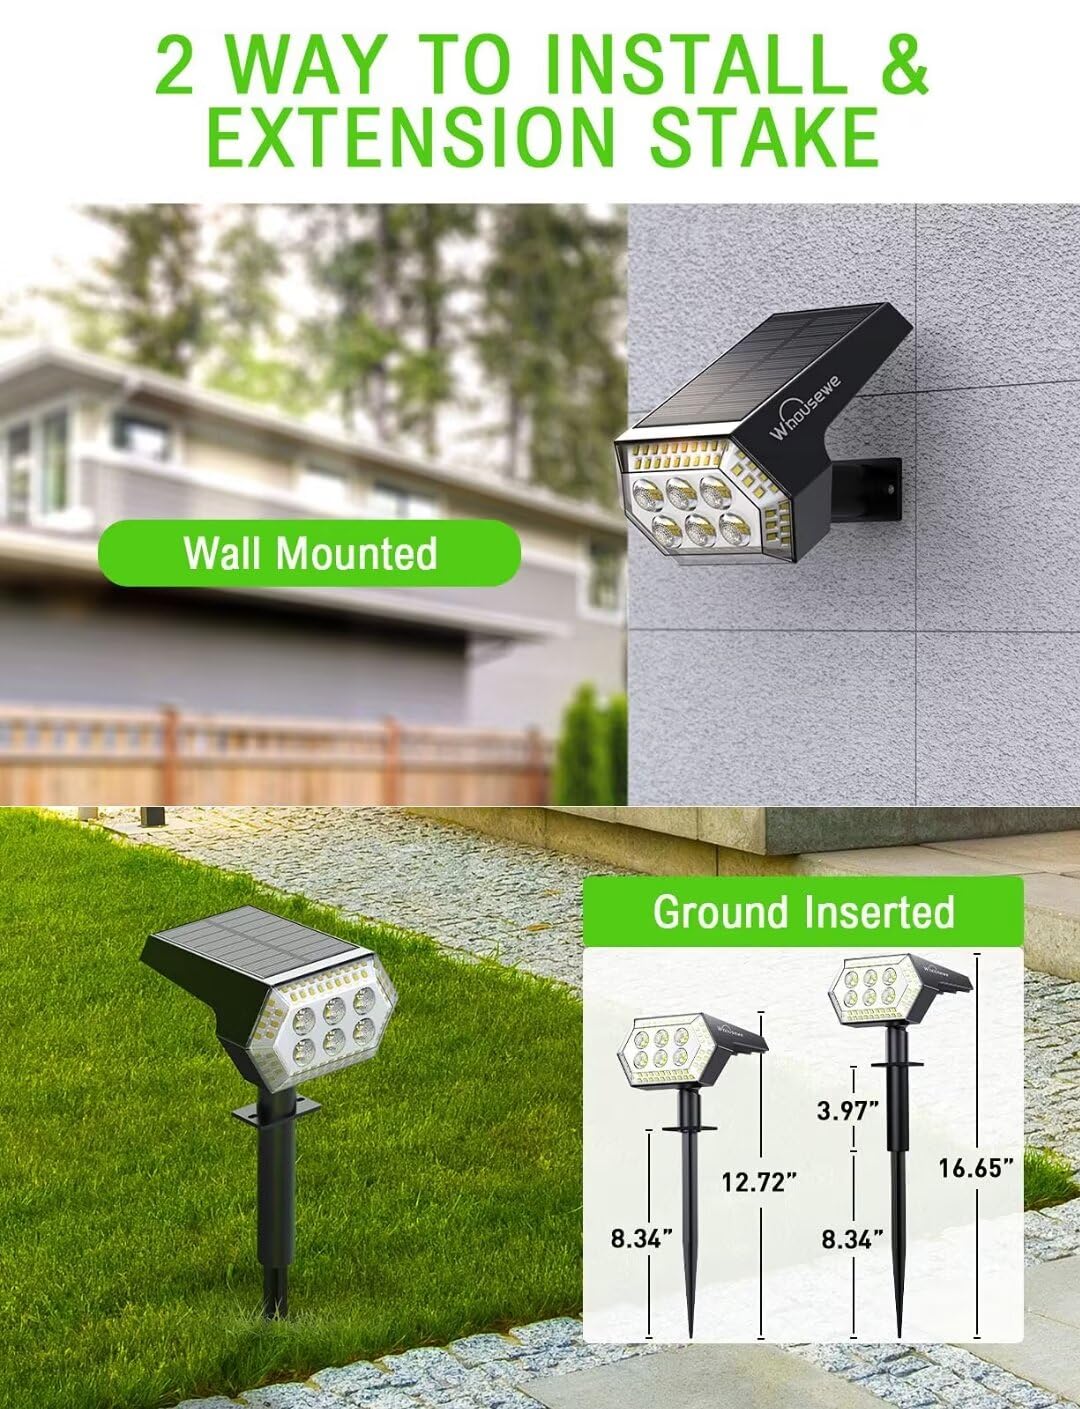 OOTDAY Spot Lights Outdoor, 4 Bright Modes Solar Lights Outdoor with IP65 Waterproof, 2-in-1 Outdoor Spot Lights Suitable for Yard, Garden, Pathway, Driveway, Walkway, 108 LEDs, 2 Pcs